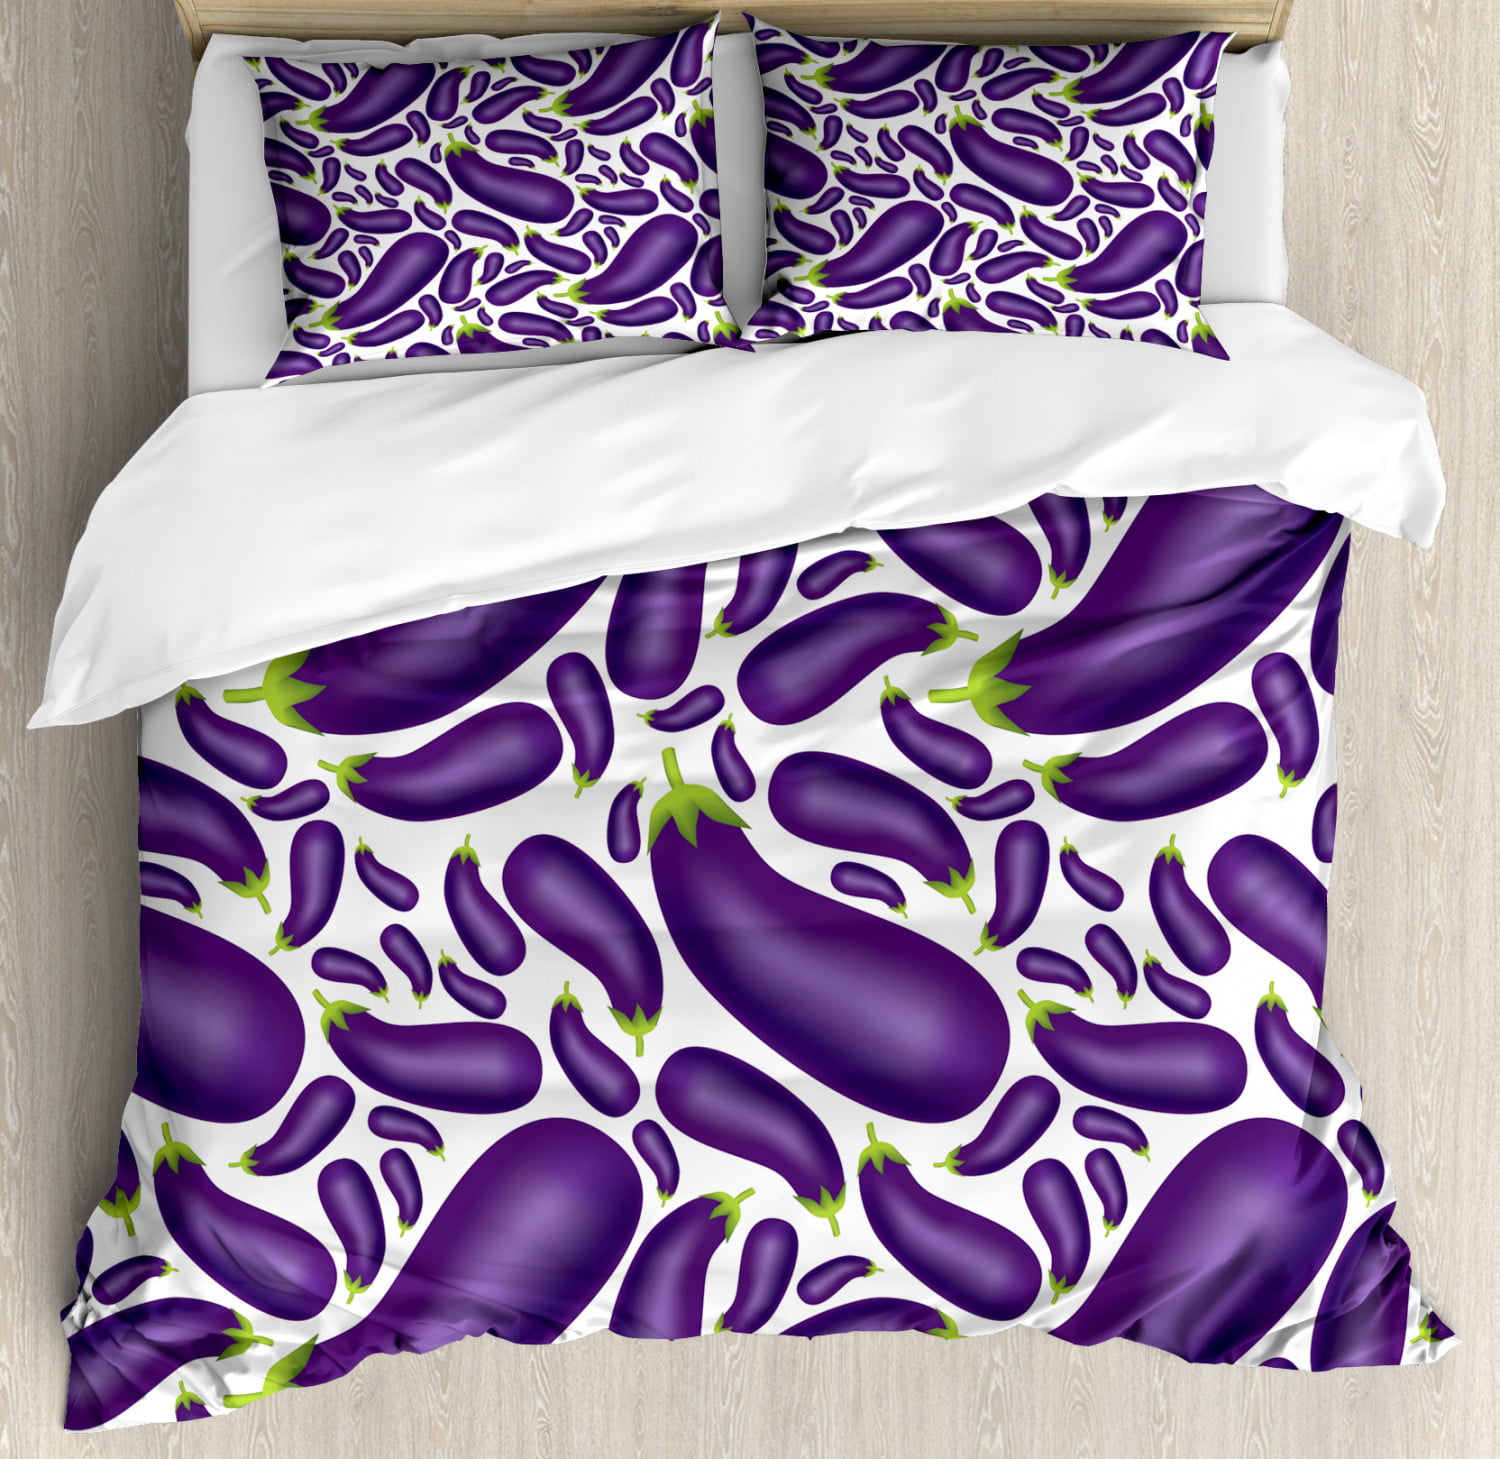 Eggplant Duvet Cover Set Twin Queen King Sizes with Pillow Shams Ambesonne 